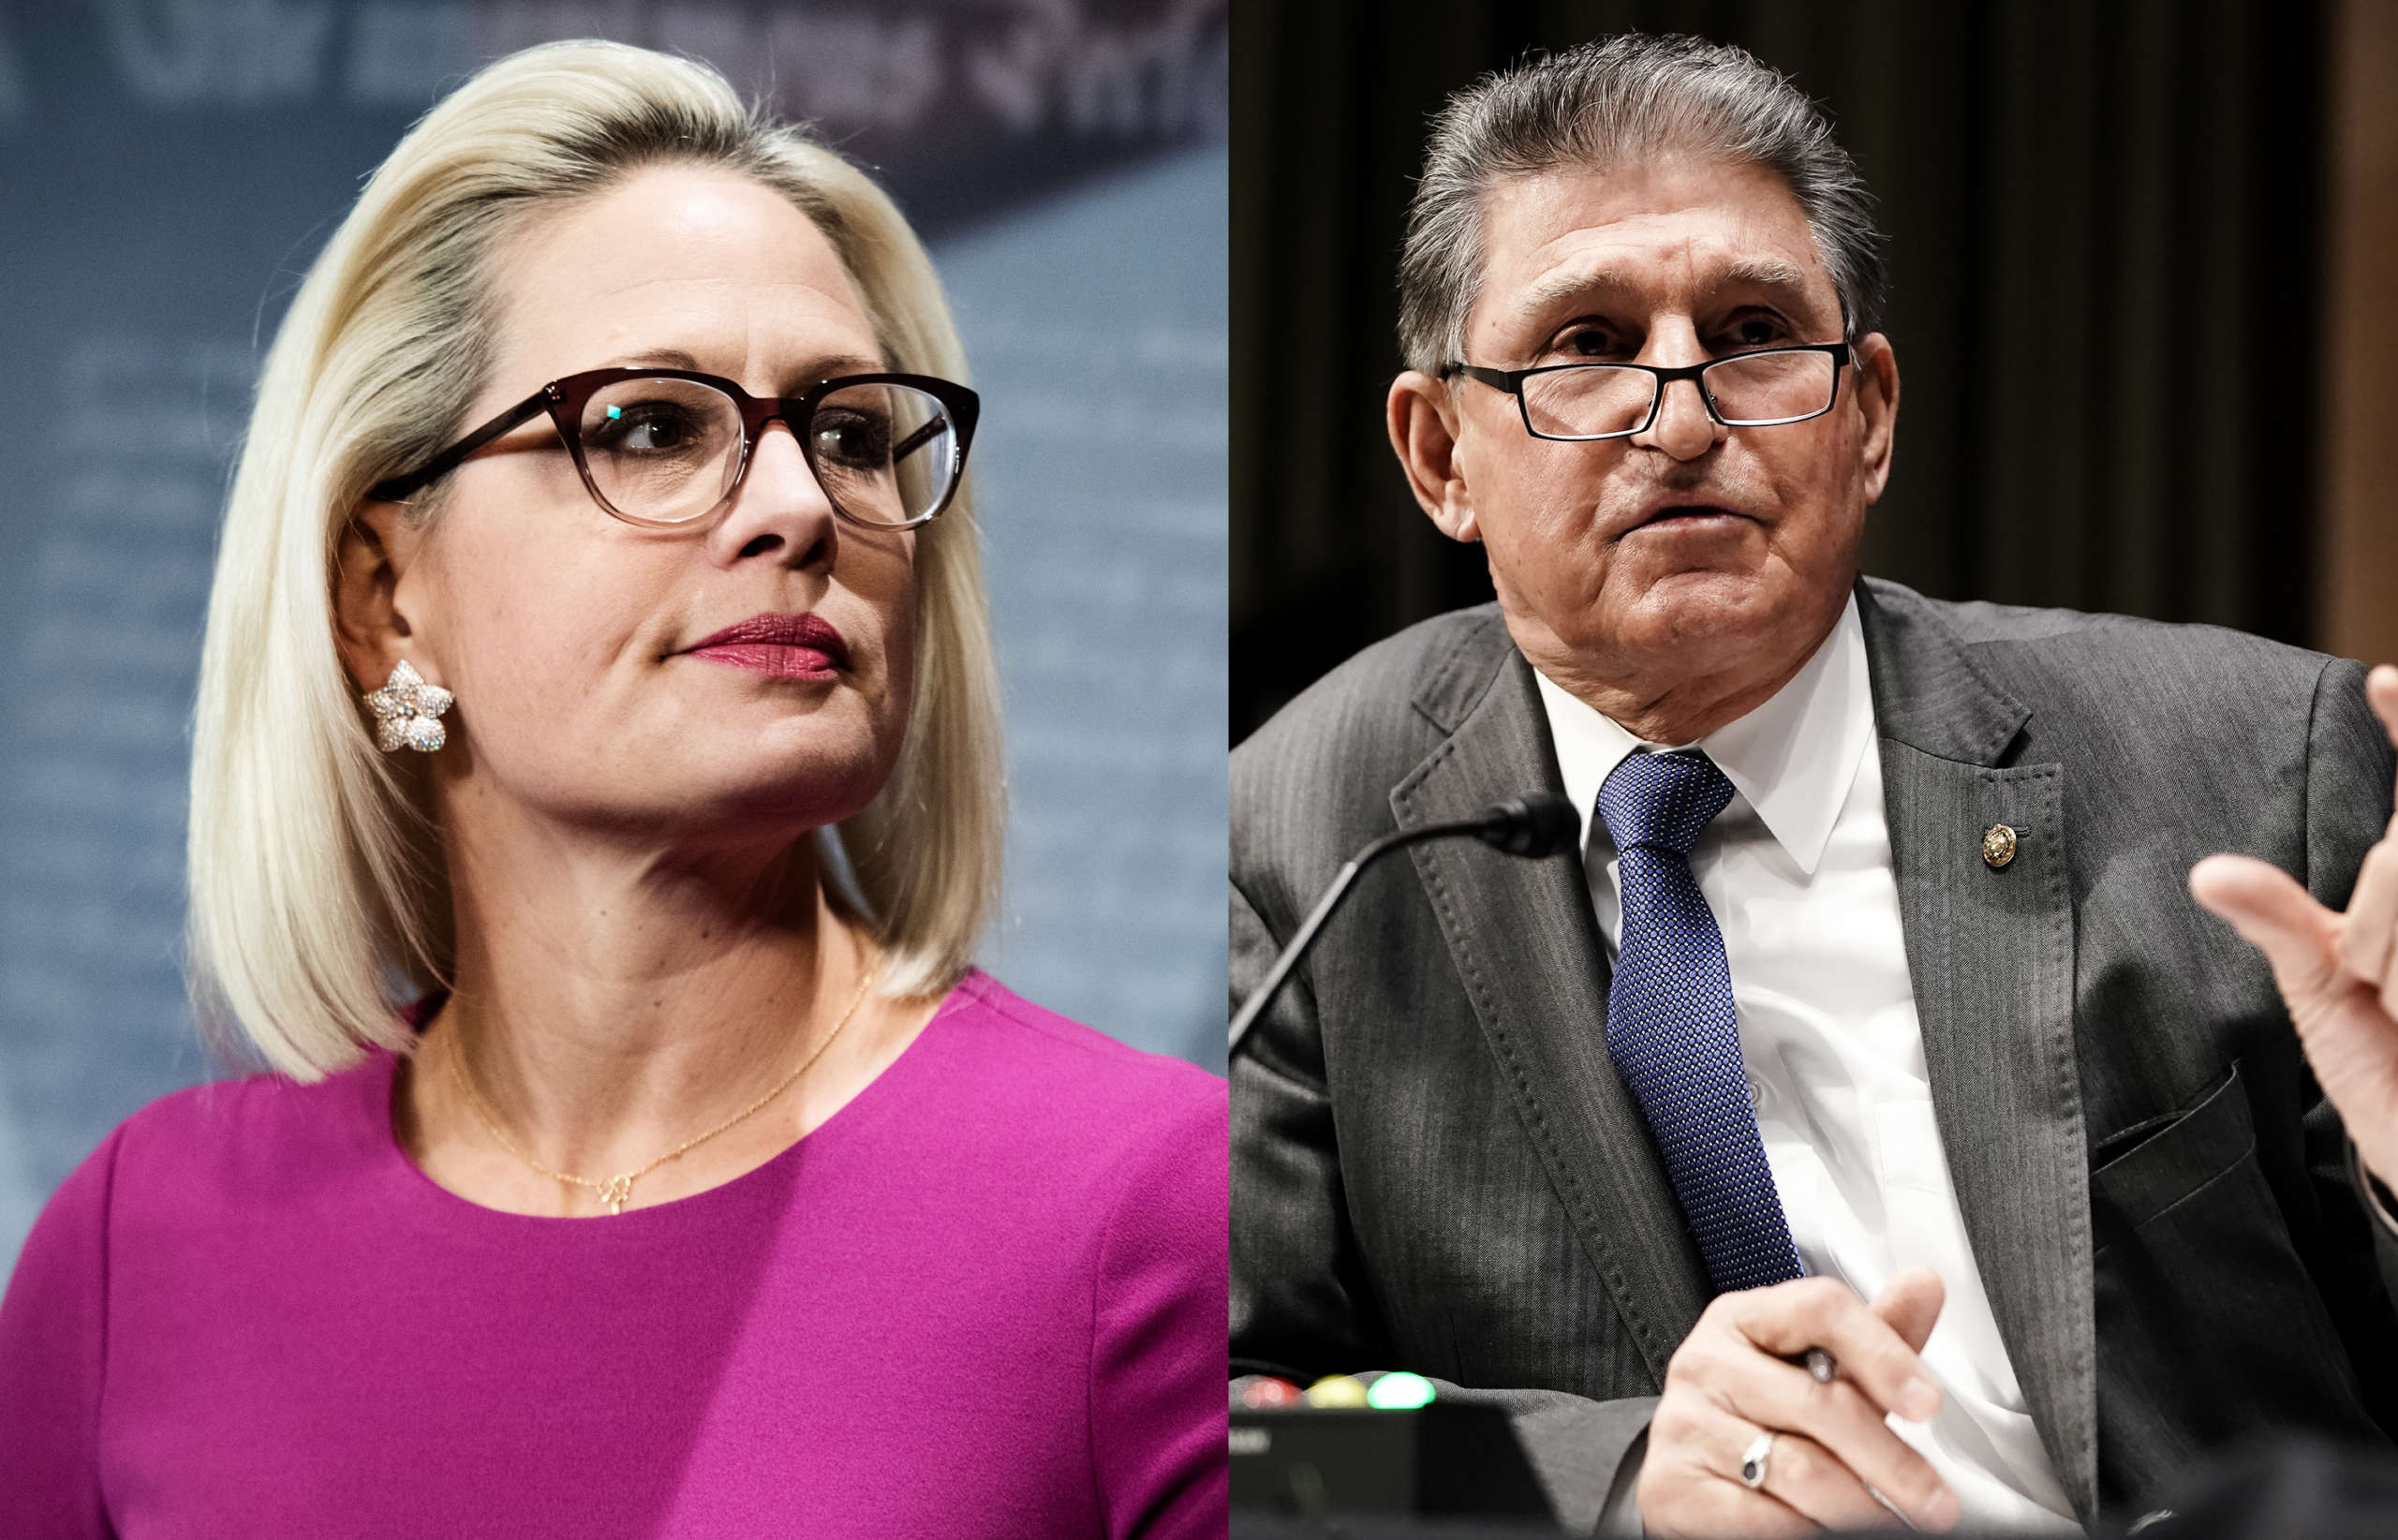 Centrist Democrats Manchin, Sinema Side With McConnell to Protect the Filibuster